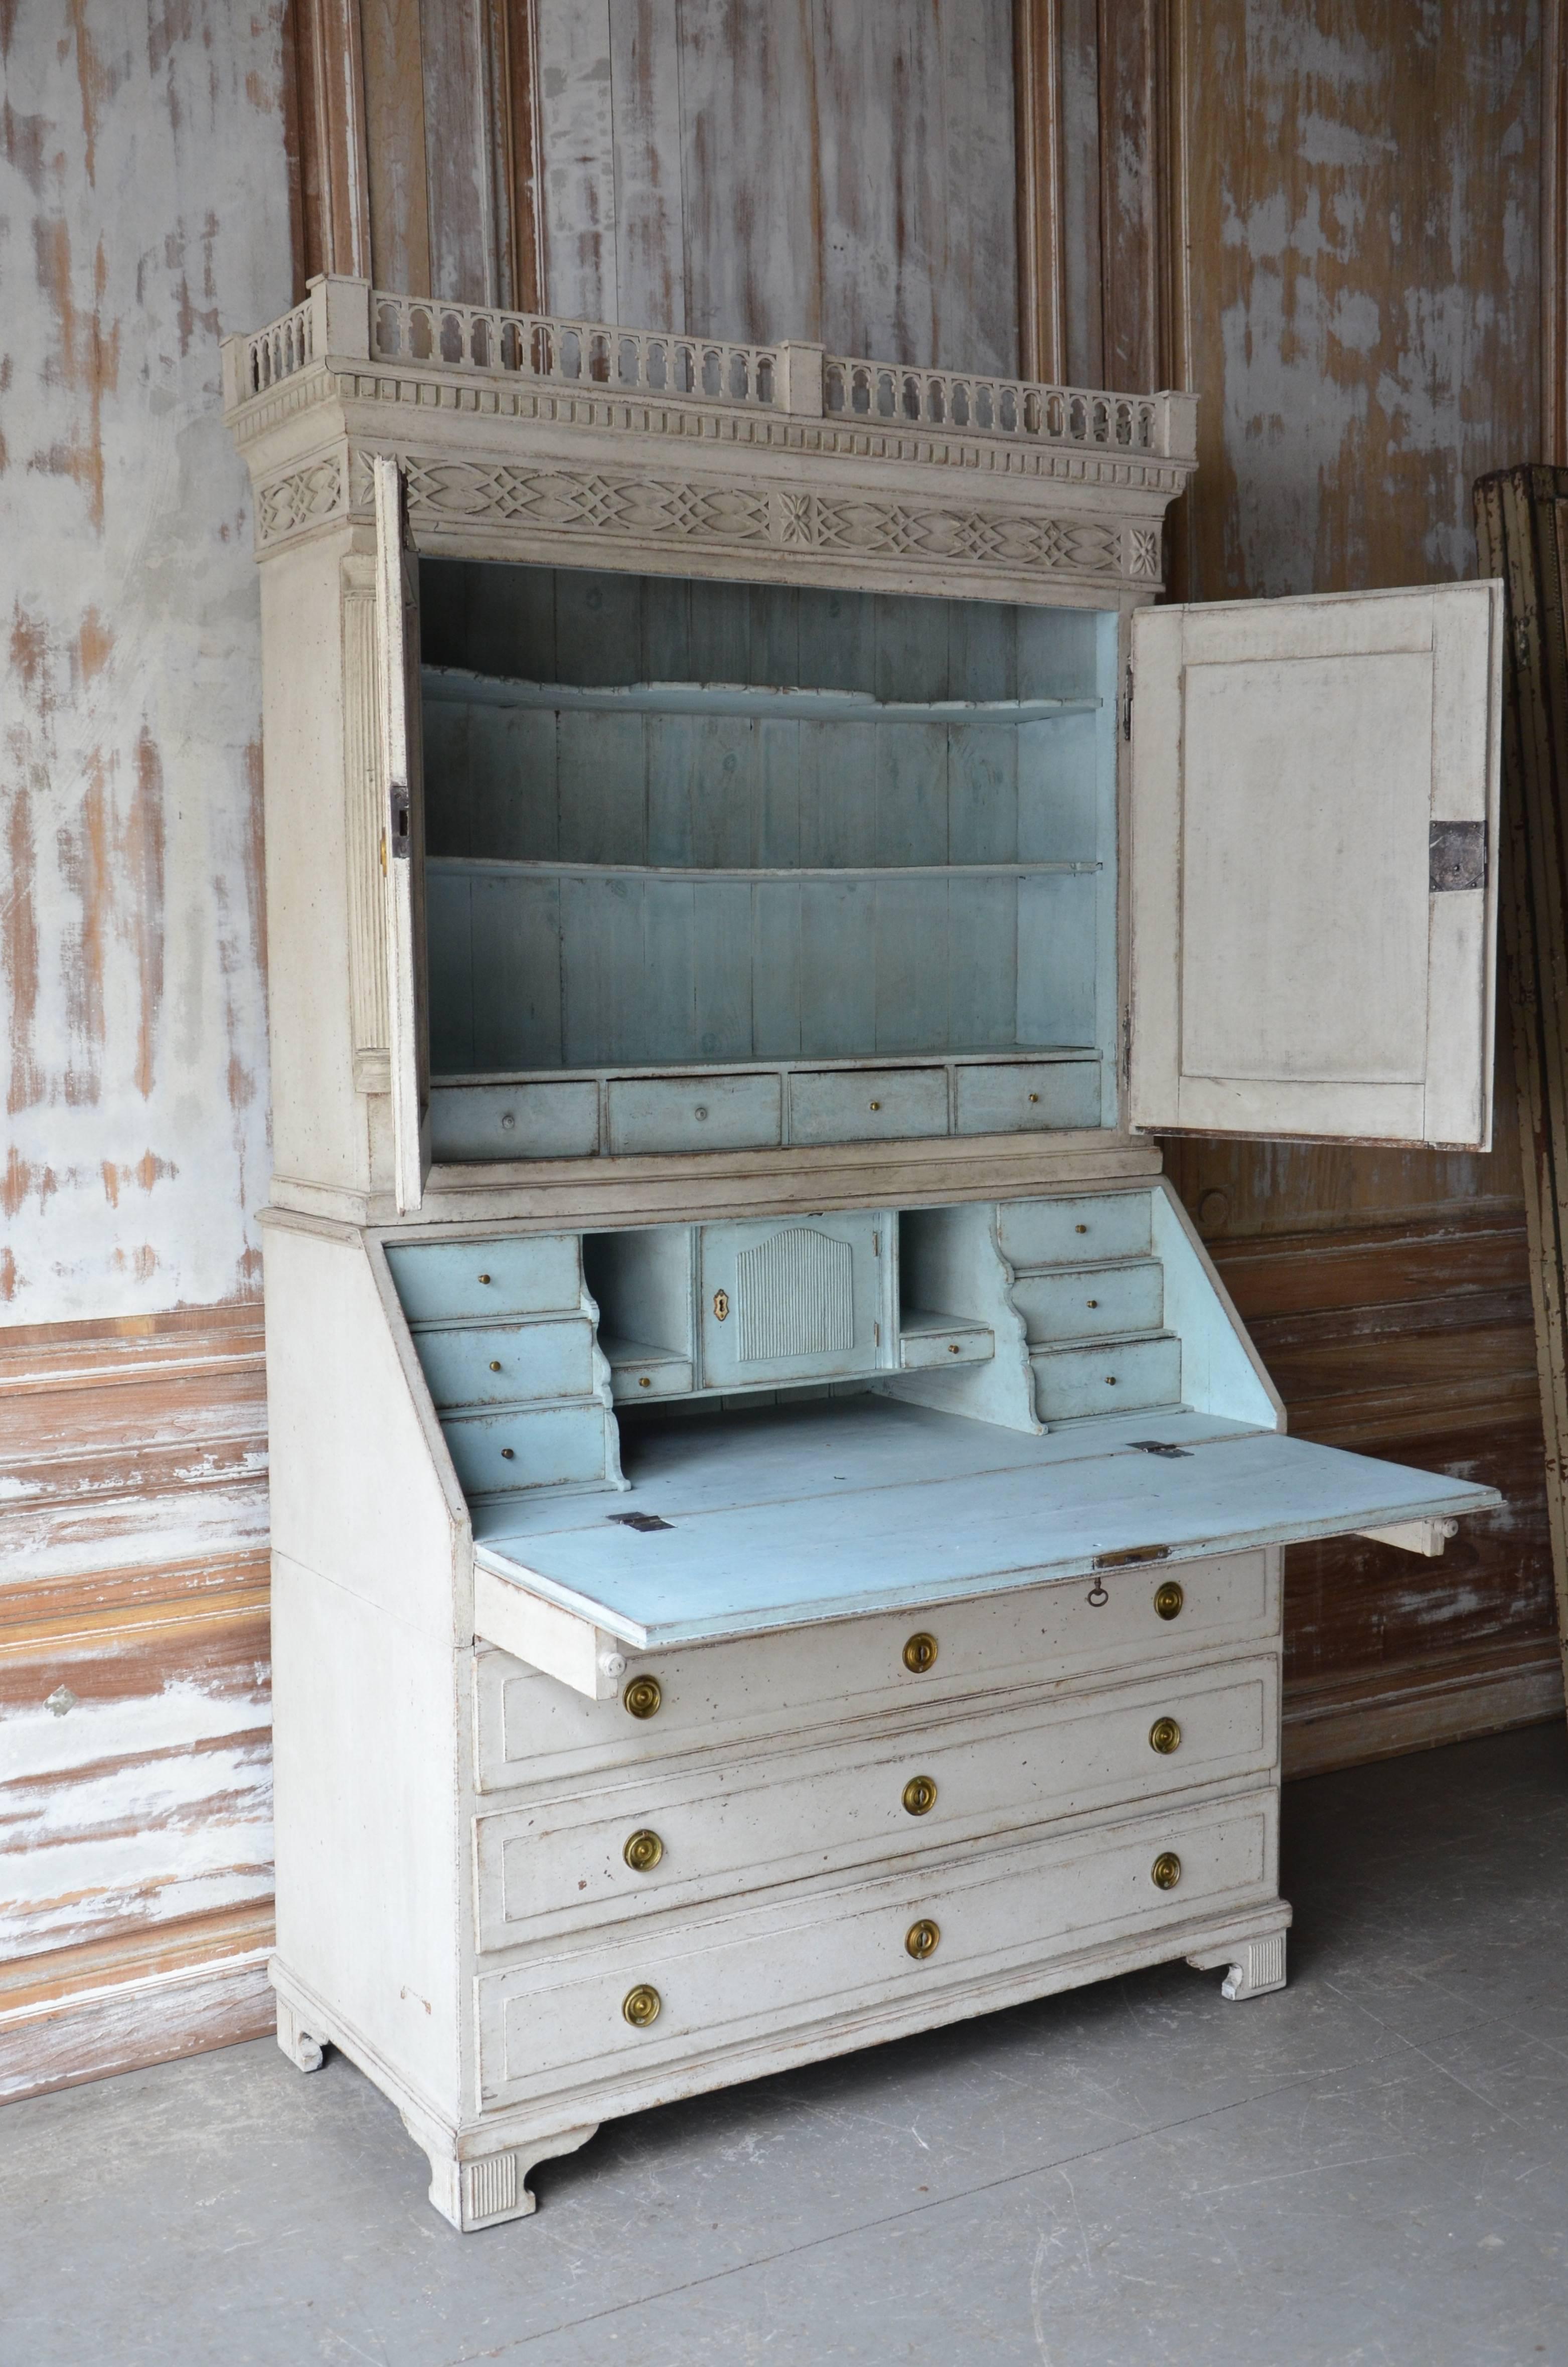 Very fine example of 18th century period Gustavian secretaire with richly carved balcony pediment cornice and fall front desk with multiple small compartments over a Classic three-drawer bureau on beautifully shaped feet, Sweden, circa 1750.
When